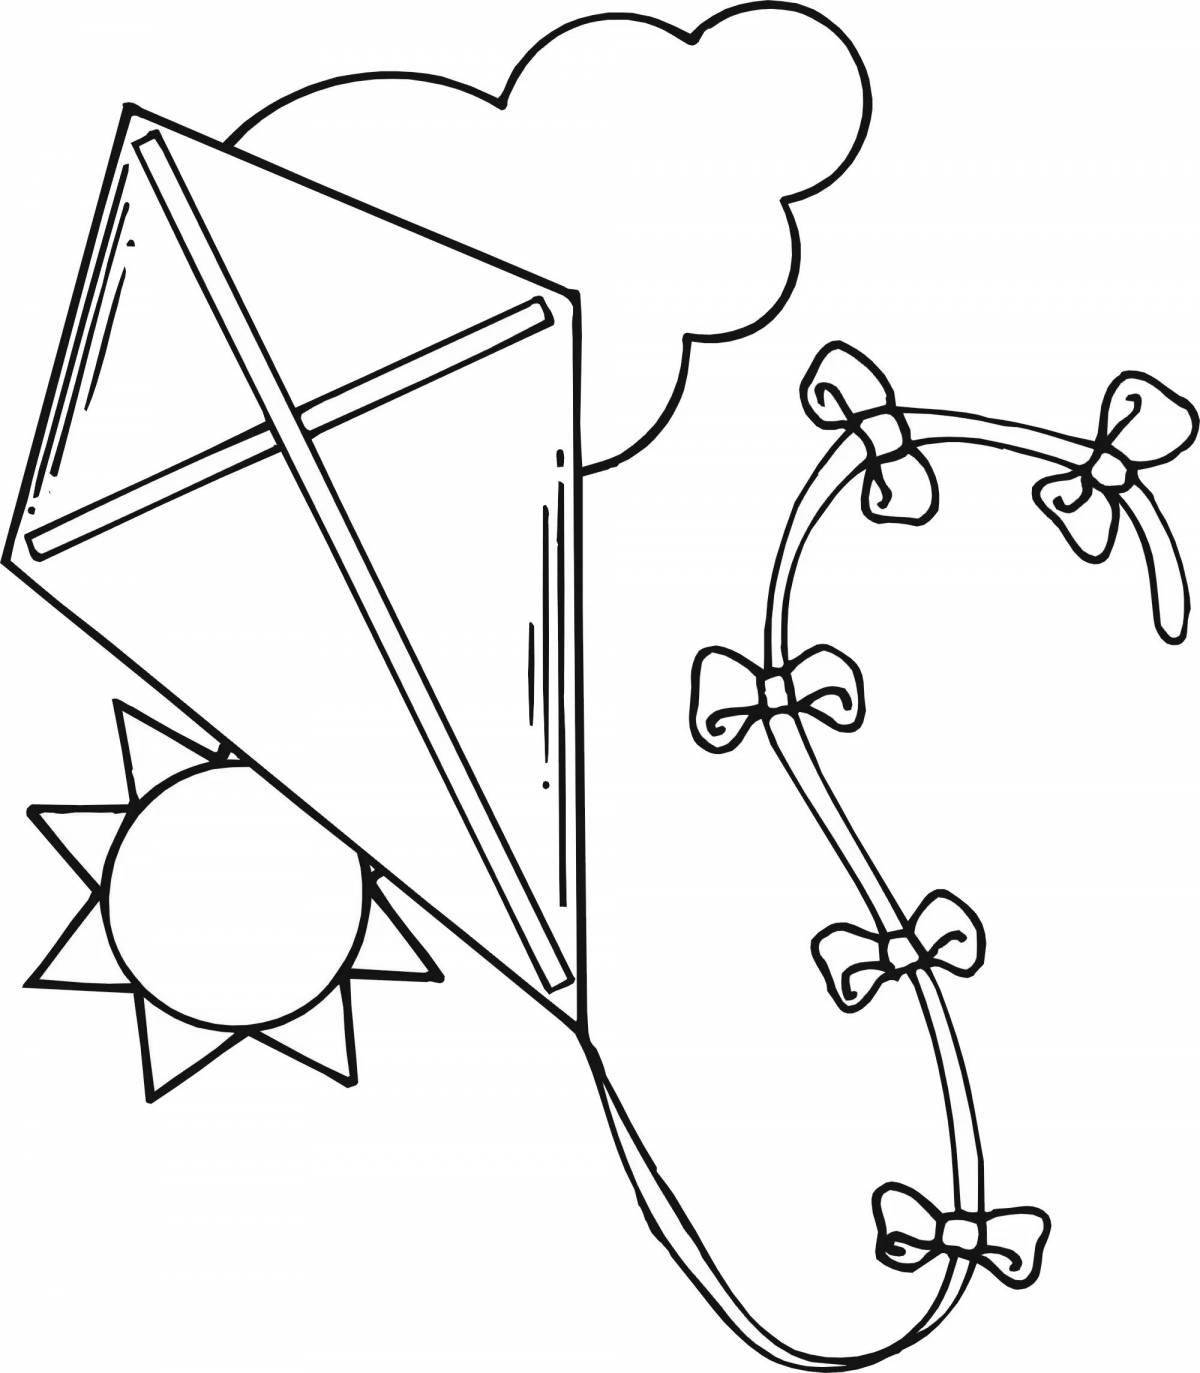 Colorful kite coloring page for kids